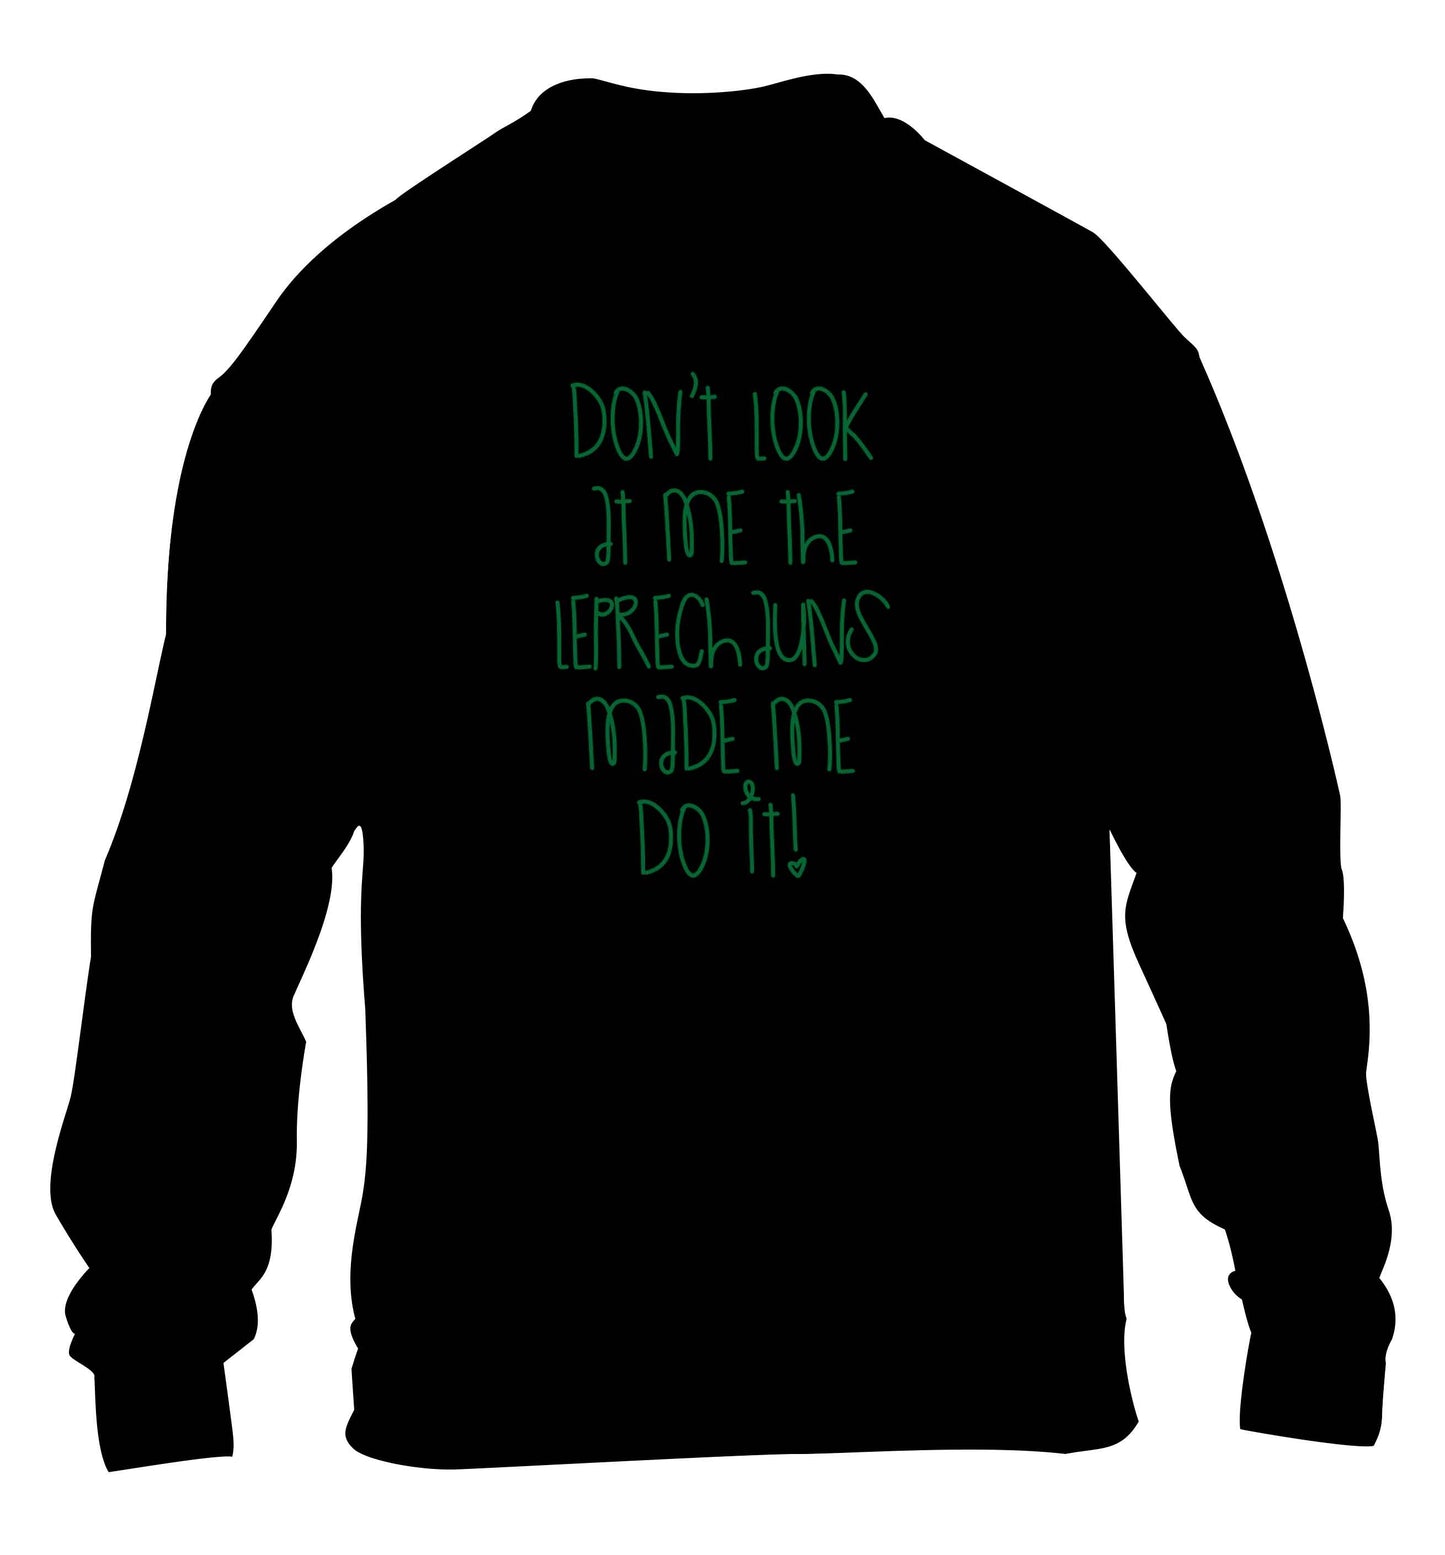 Don't look at me the leprechauns made me do it children's black sweater 12-13 Years